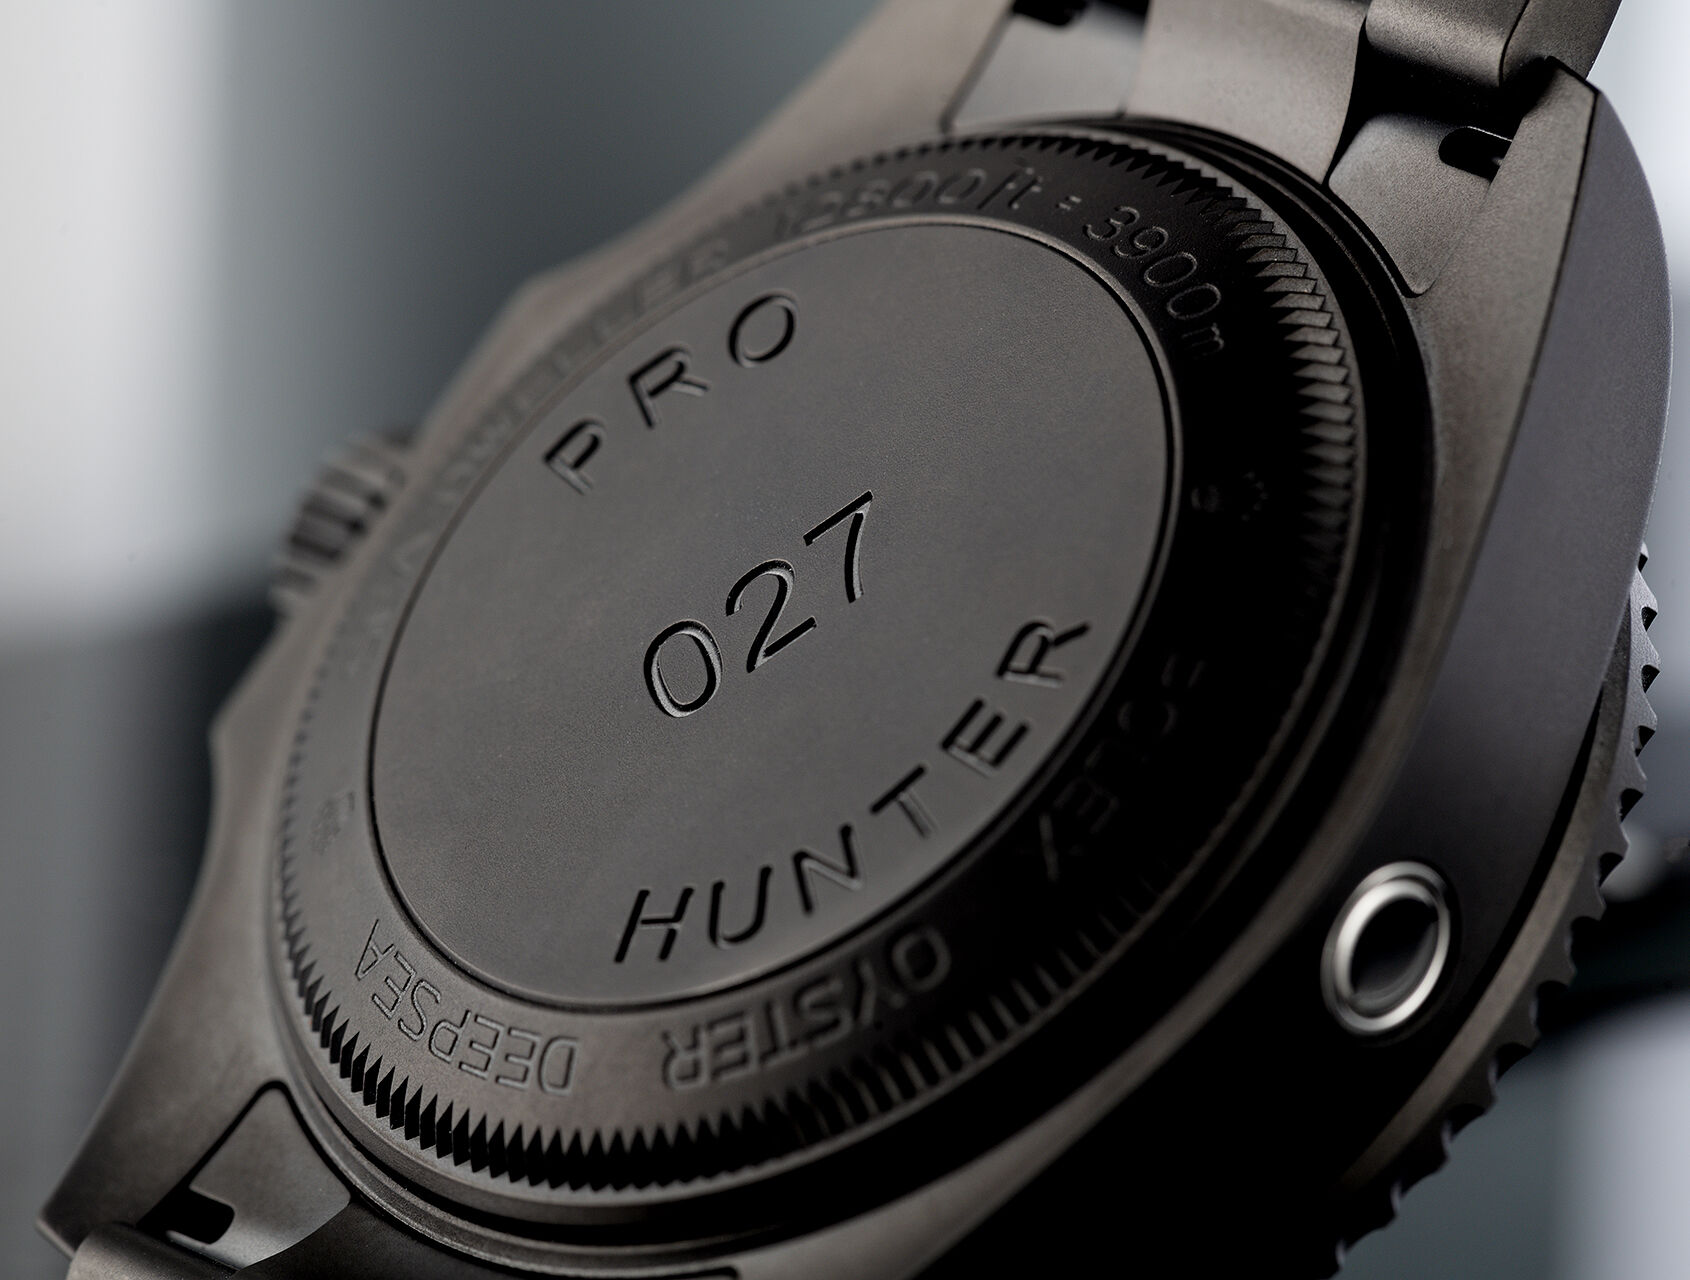 ref 126660 | Limited to 100 Pieces | Pro Hunter Sea-Dweller Deepsea Stealth